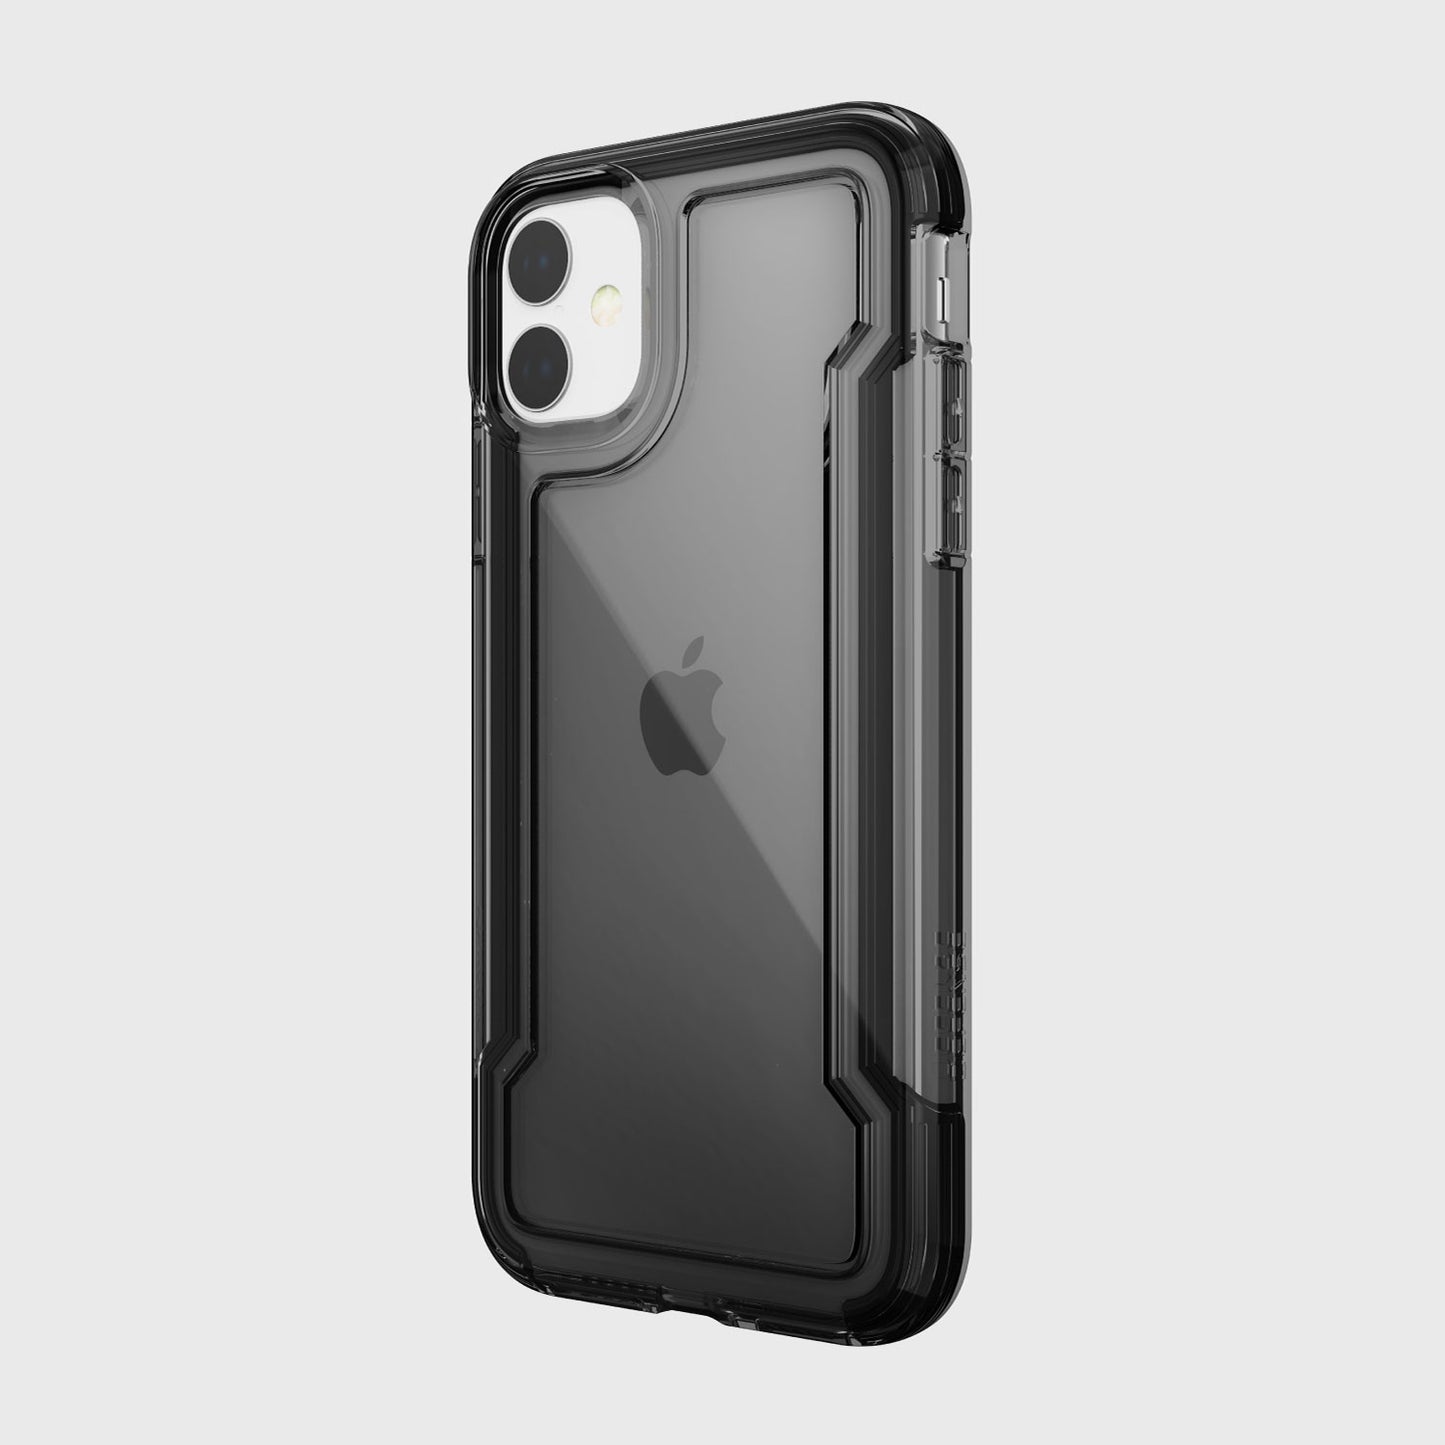 The shock-absorbing rubber back view of a Raptic Clear iPhone 11 Case - CLEAR in black.